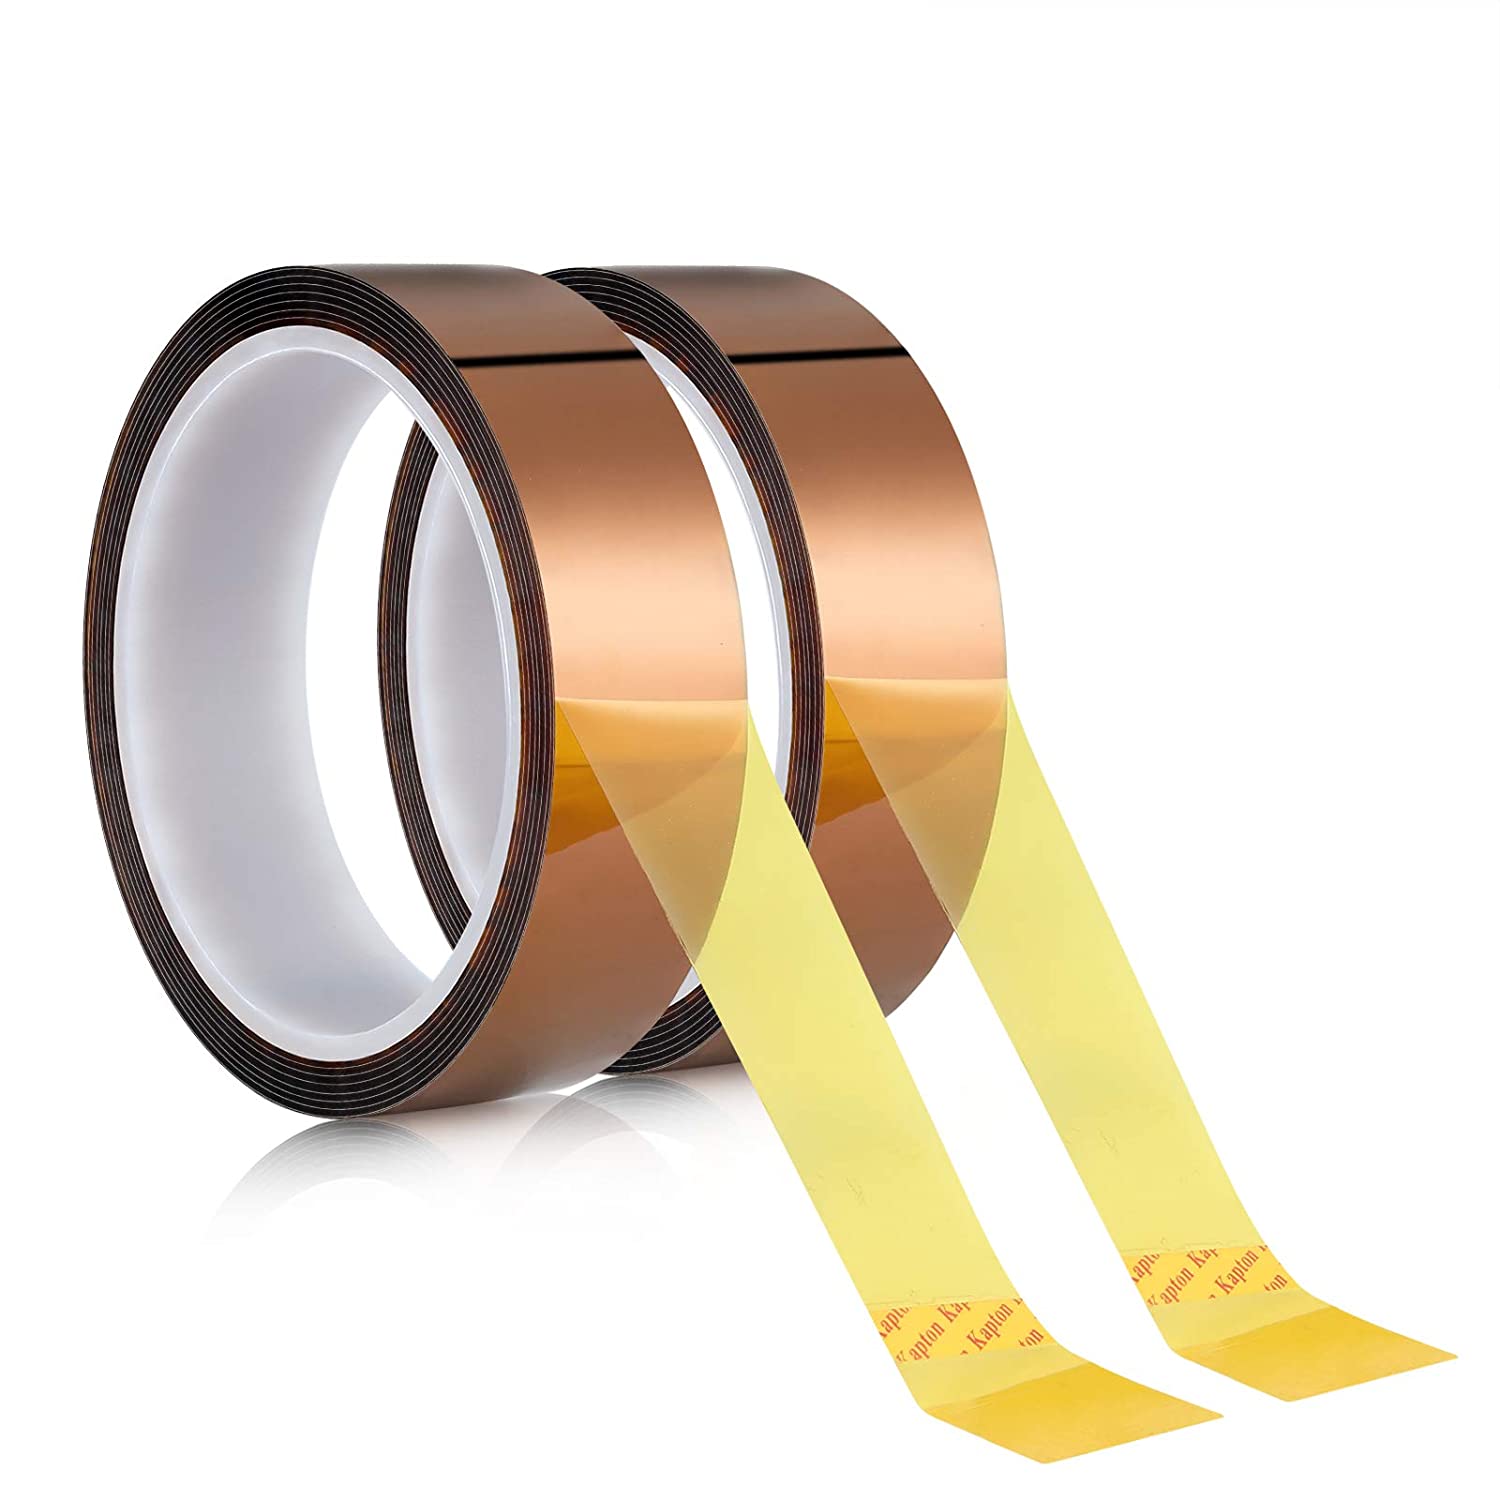 NEW High Temperature Heat Resistant Tape 10mm X33m 108ft No Residue Heat  Transfer Tape For Heat Sublimation Press5935558 From Z164, $1.06